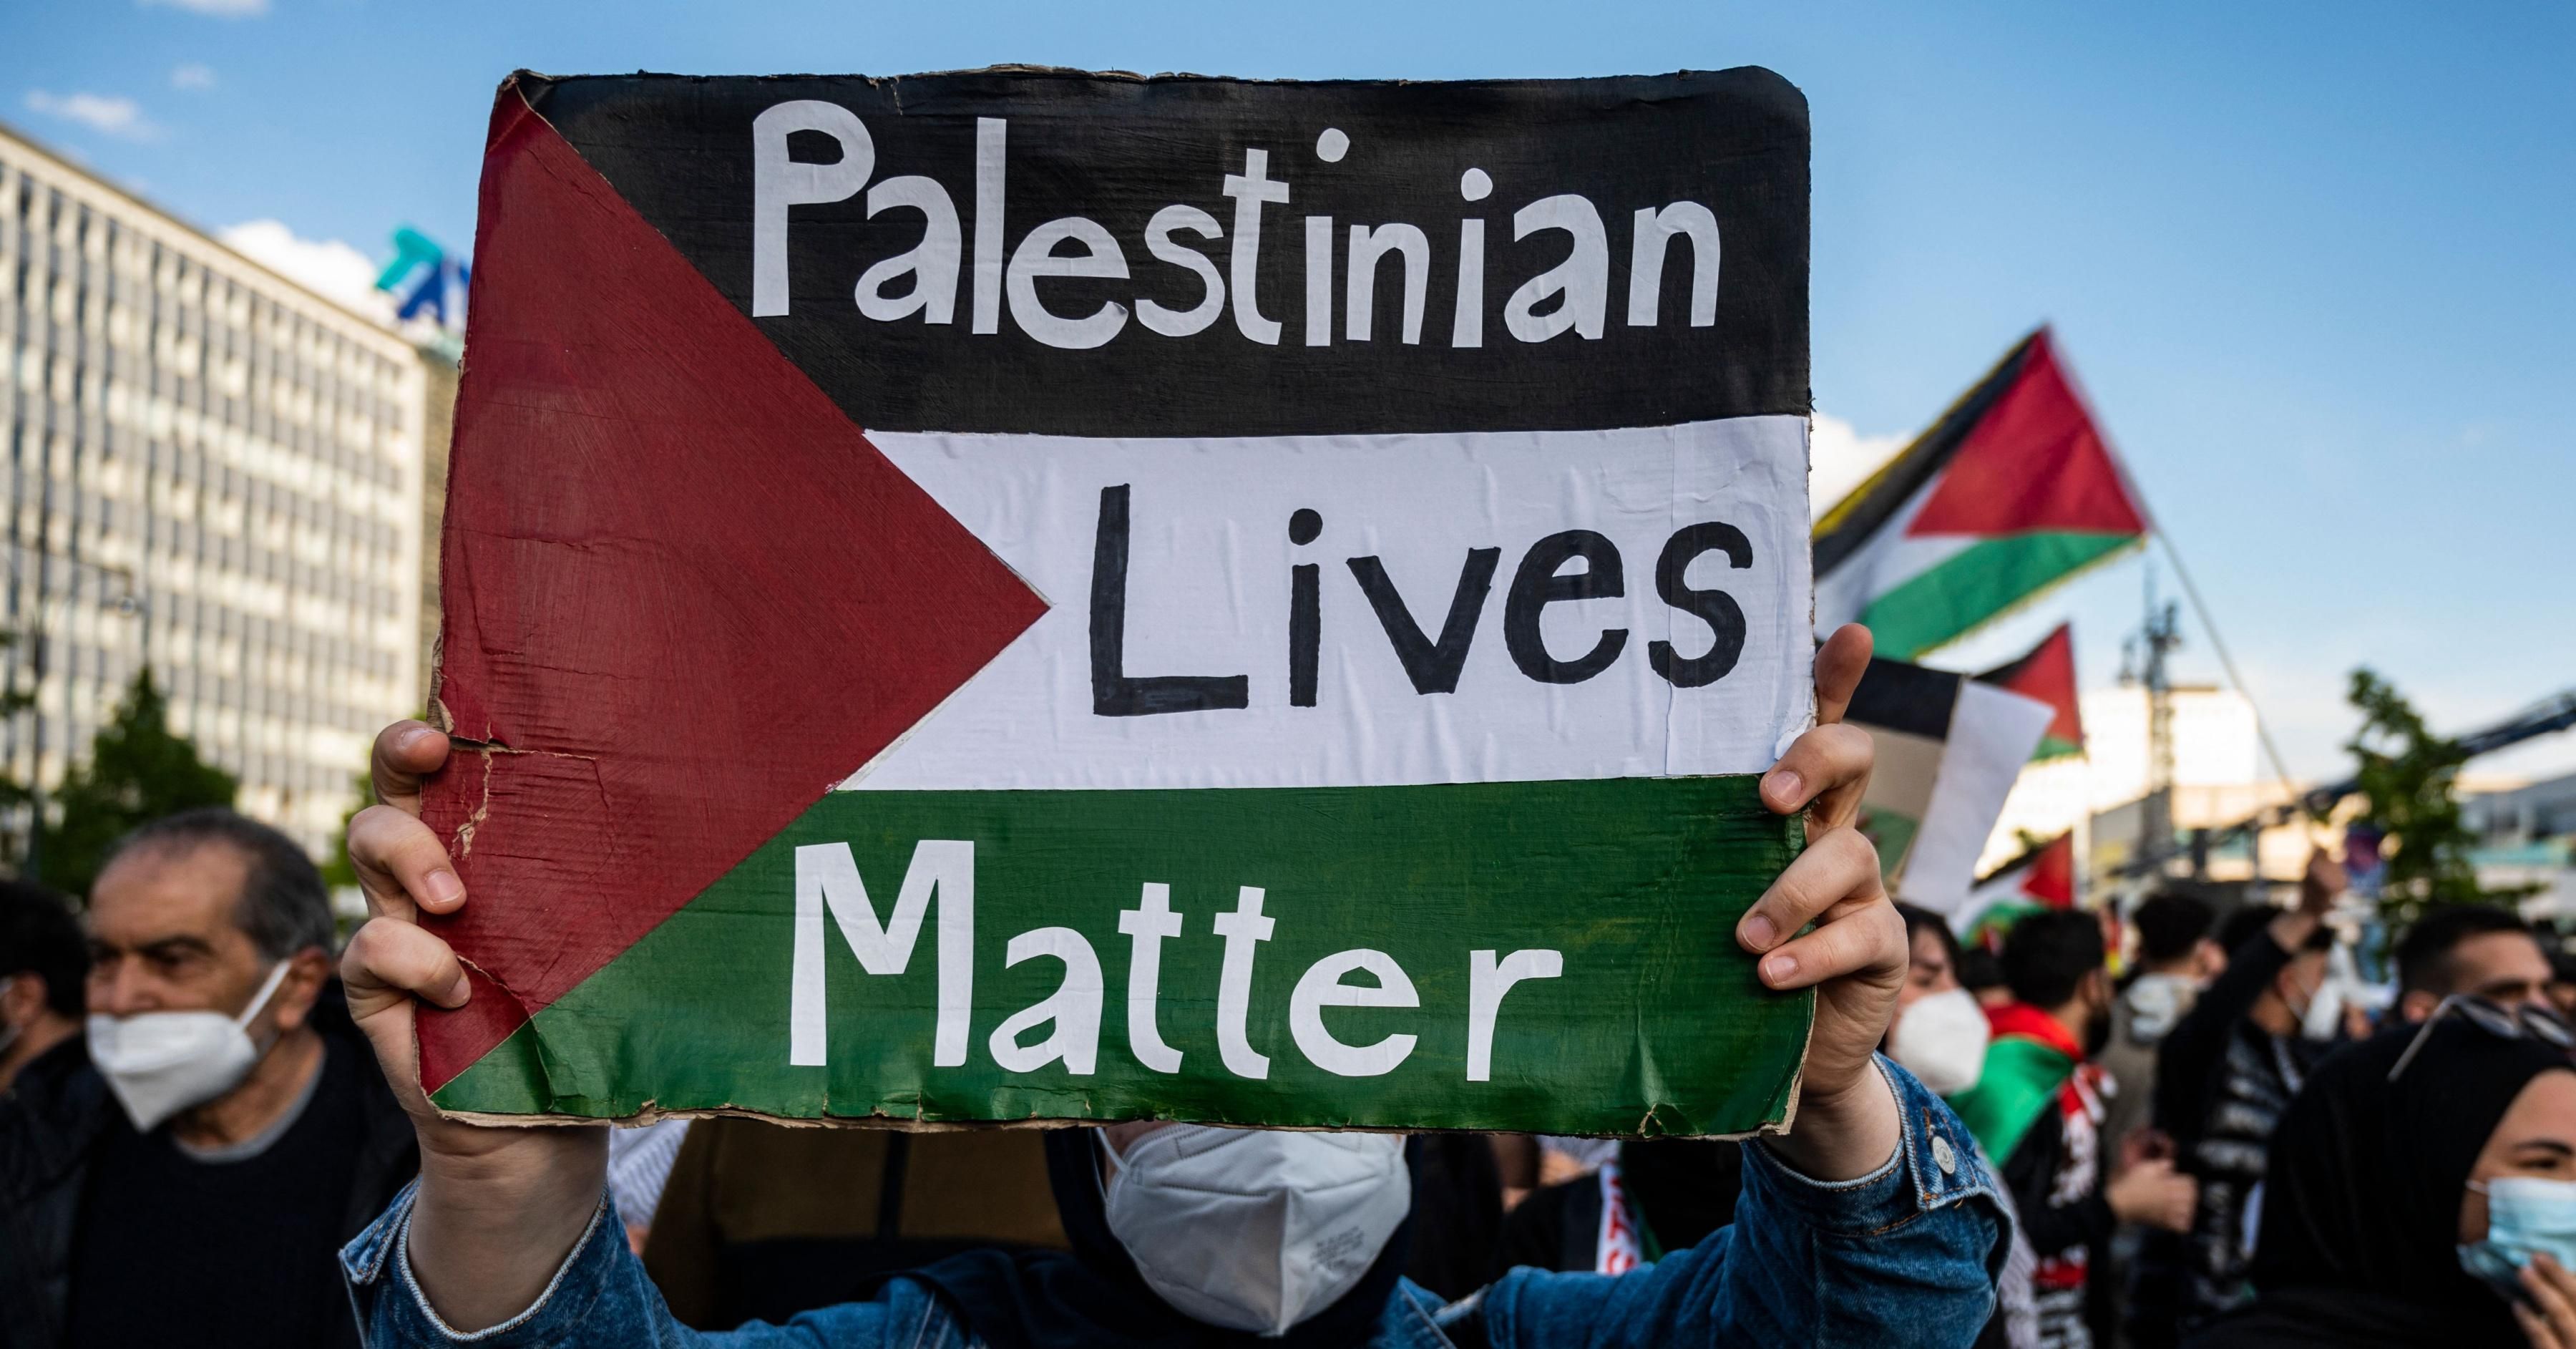 A demonstrator displays a placard reading: "Palestinian Lives Matter" during a pro-Palestinian protest in Berlin on May 19, 2021. Thousands of demonstrators marched waving Palestinian flags and shouting pro-Palestine slogans as Israel and the Palestinians were mired in their worst conflict in years. (Photo: JOHN MACDOUGALL/AFP via Getty Images)